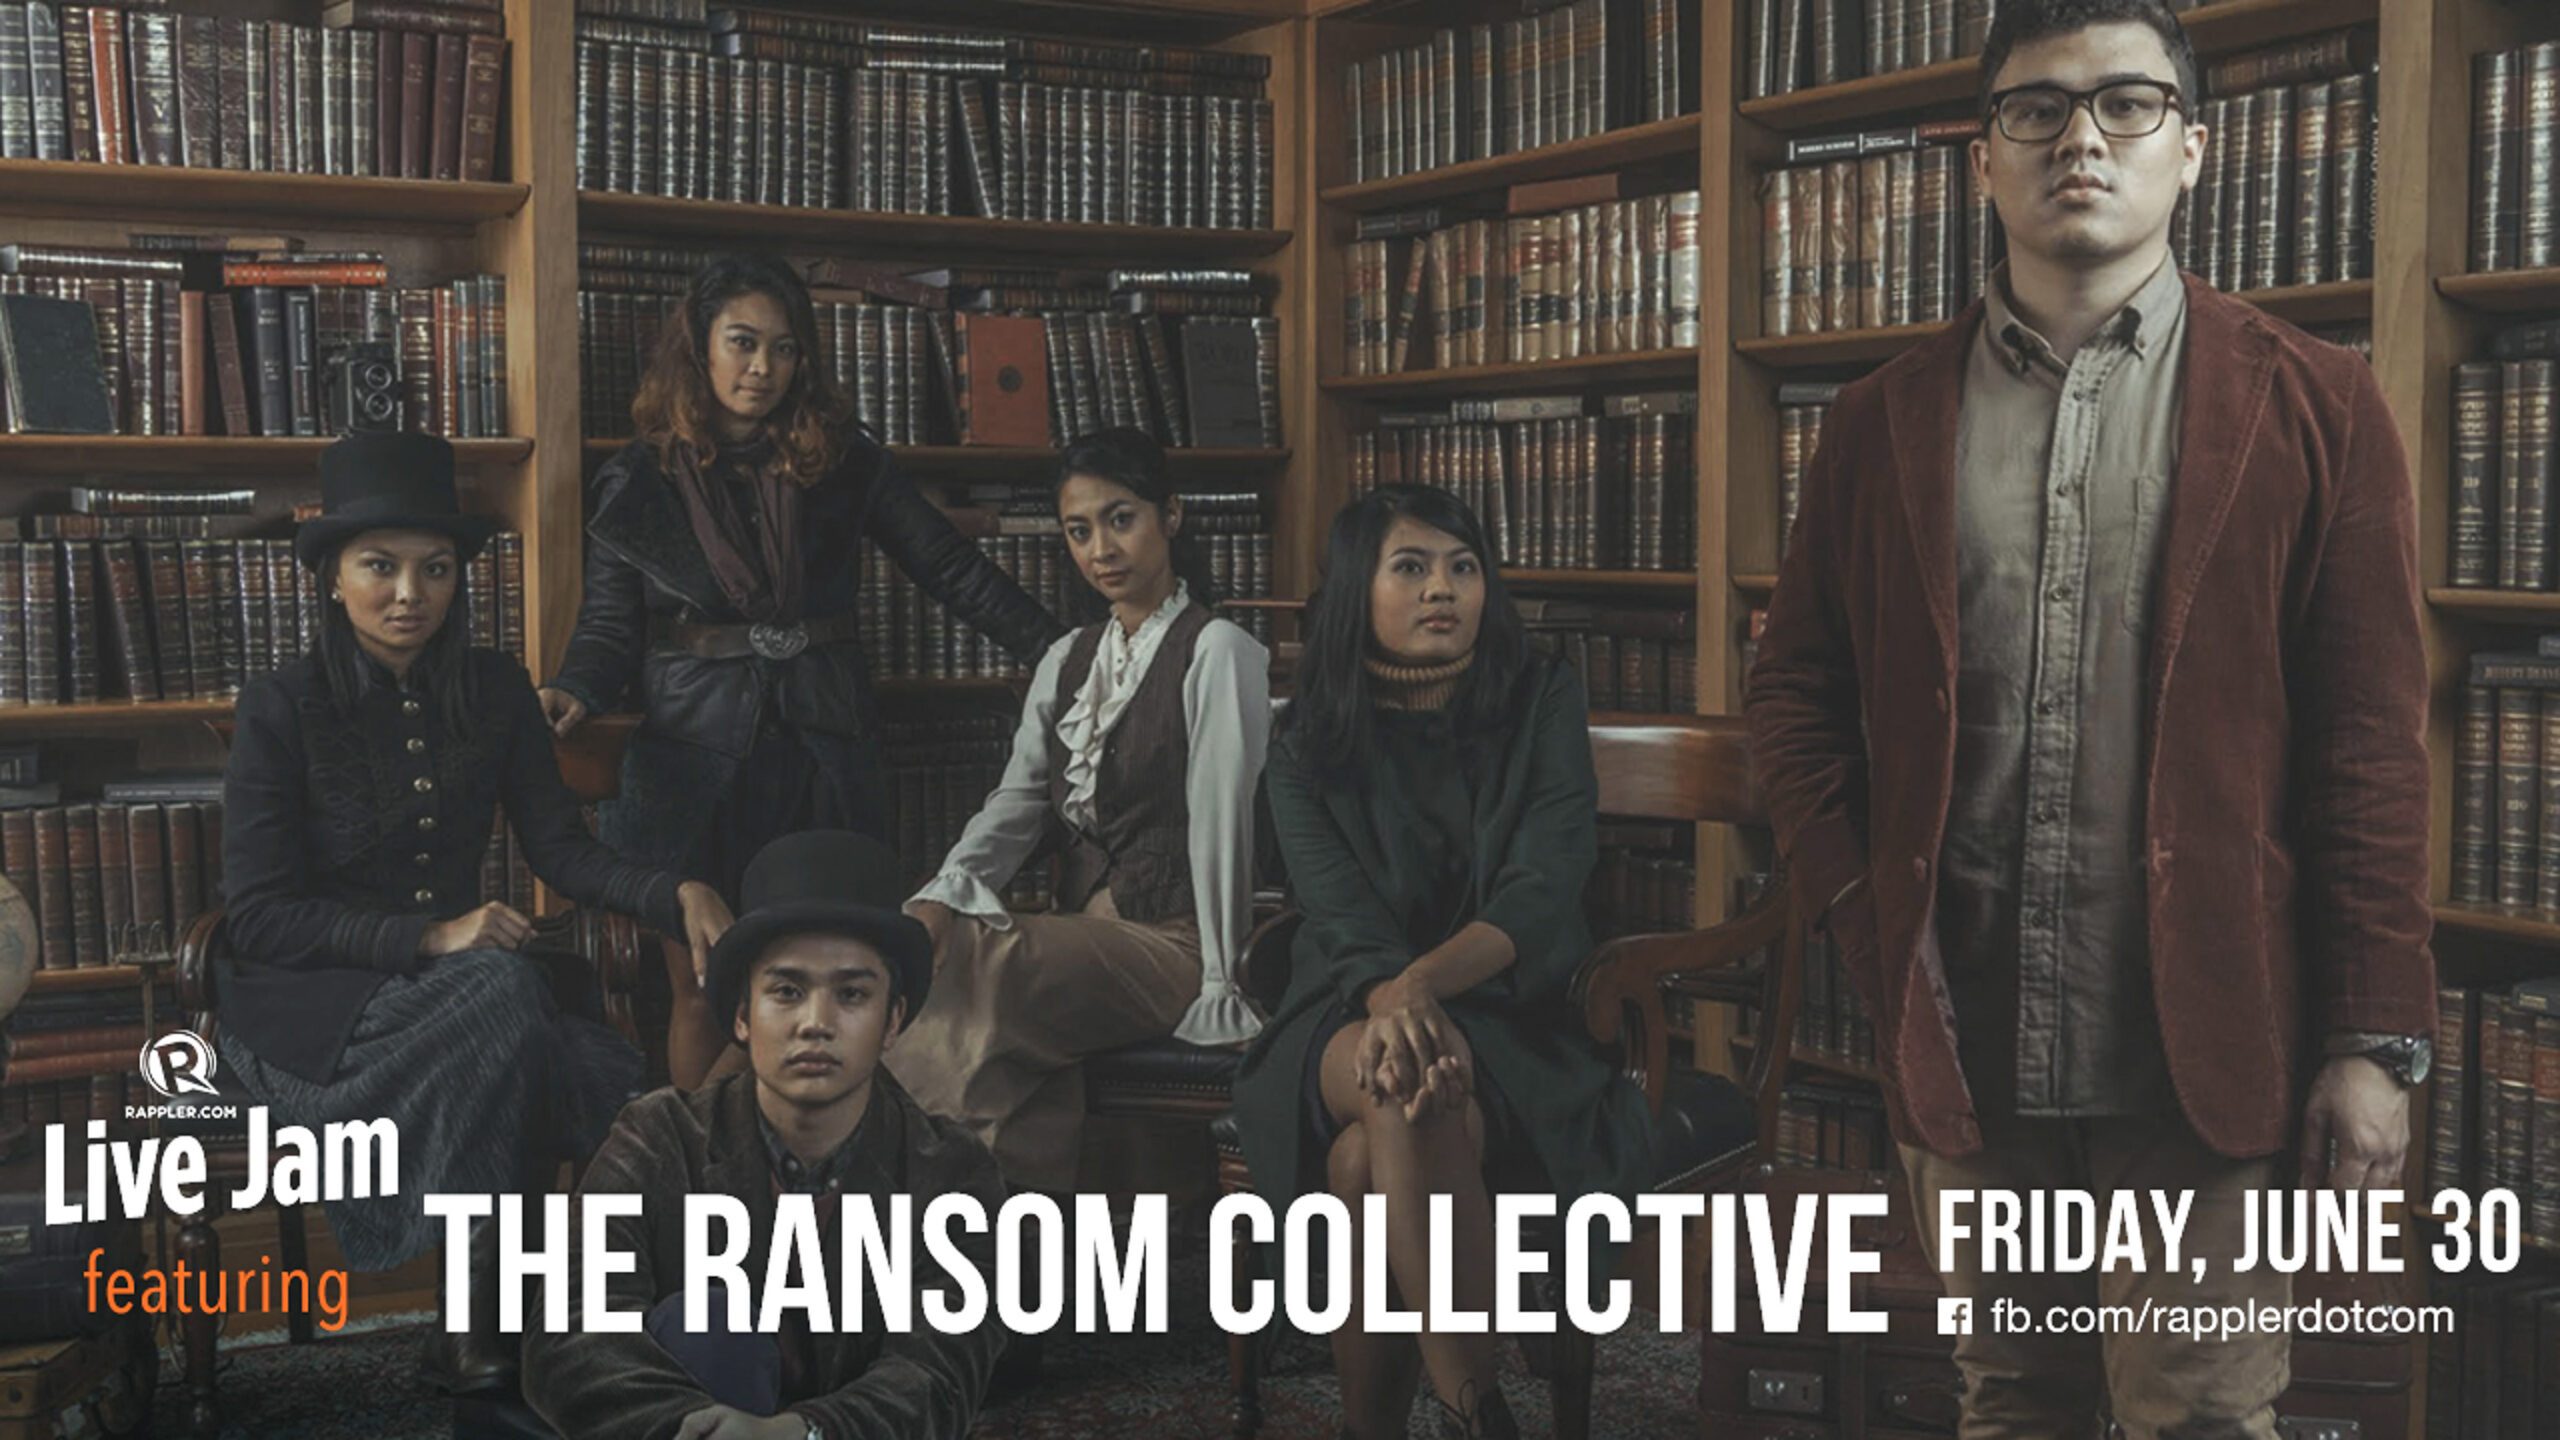 Rappler Live Jam: The Ransom Collective